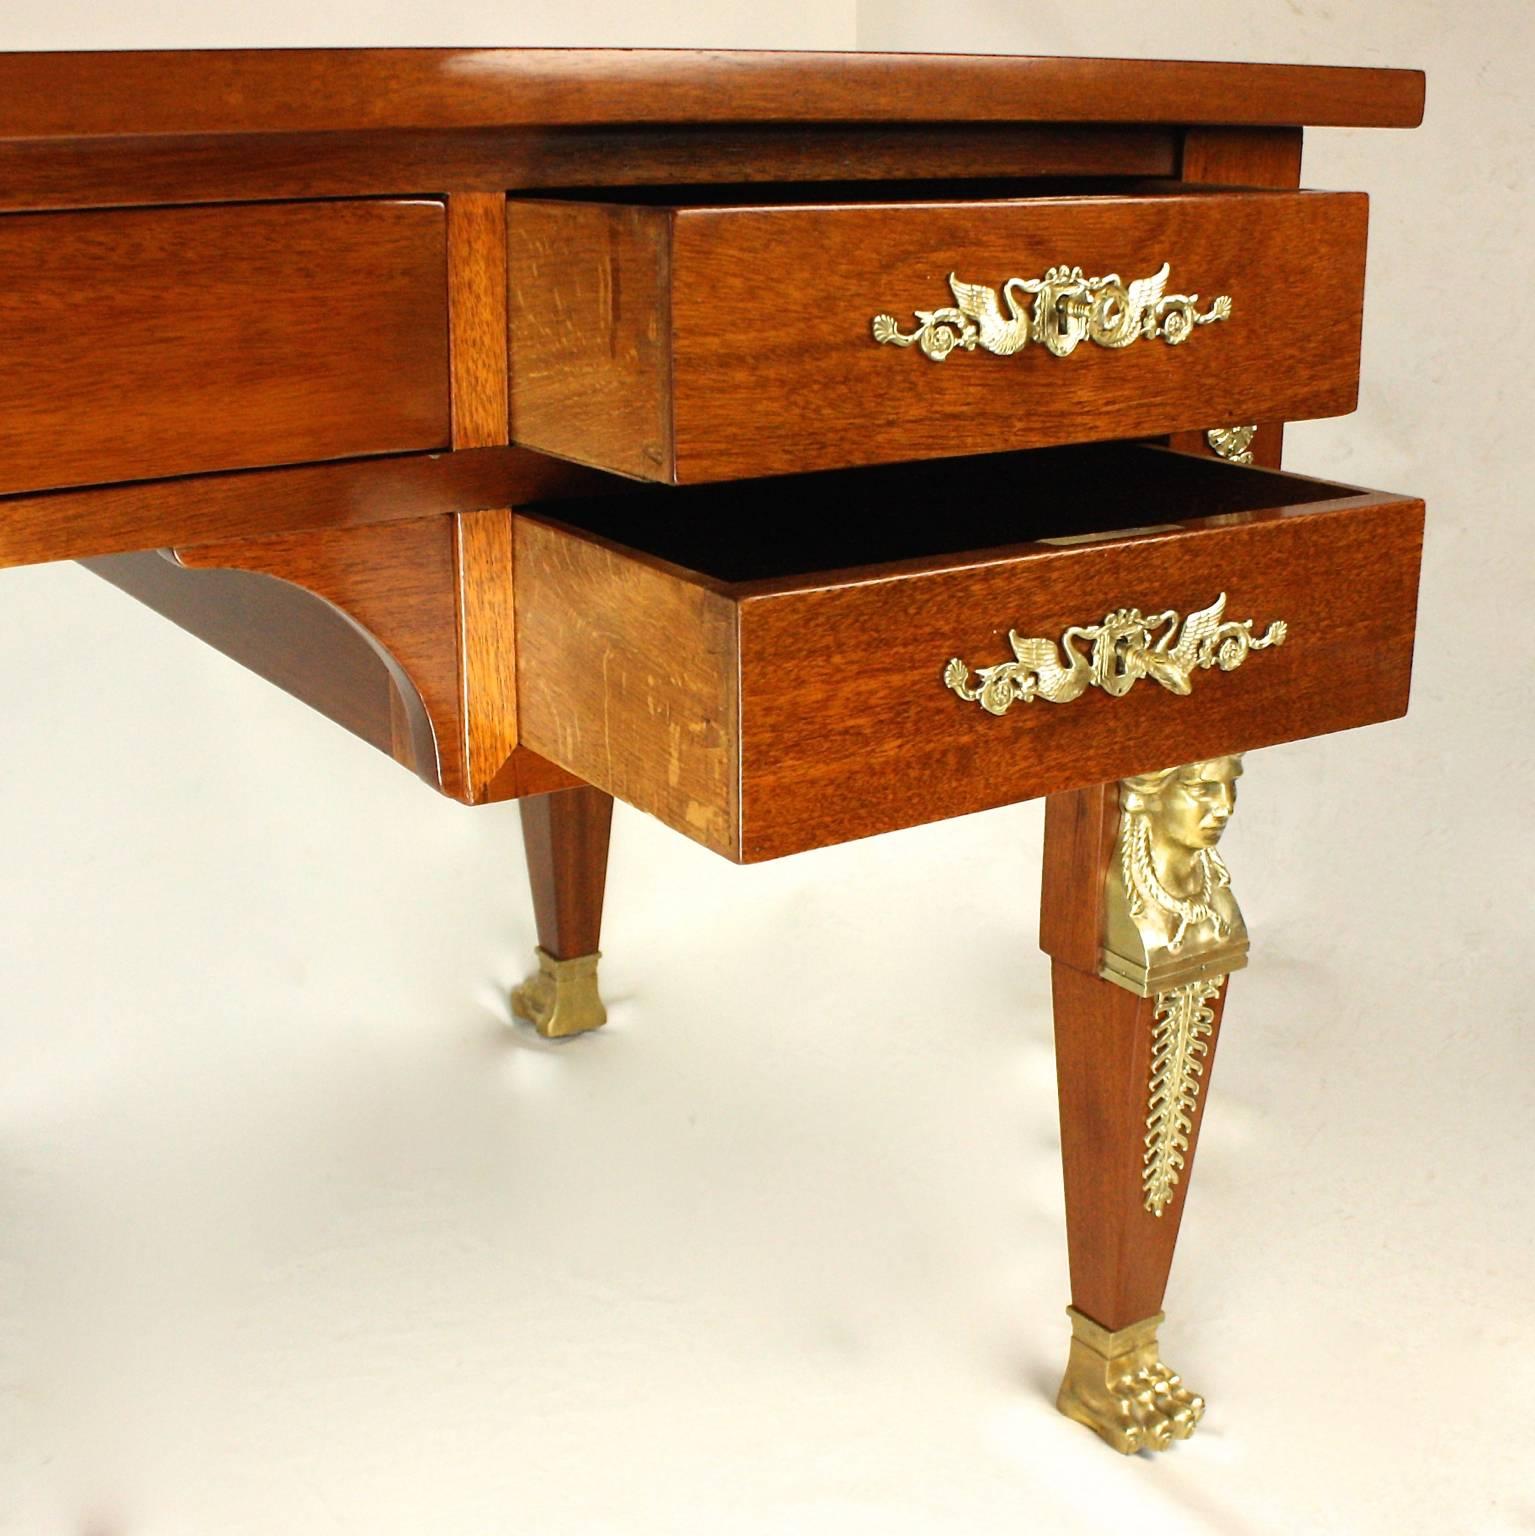 Early 19th Century Large Empire Gilt Bronze-Mounted Bureau Plat or Writing Table